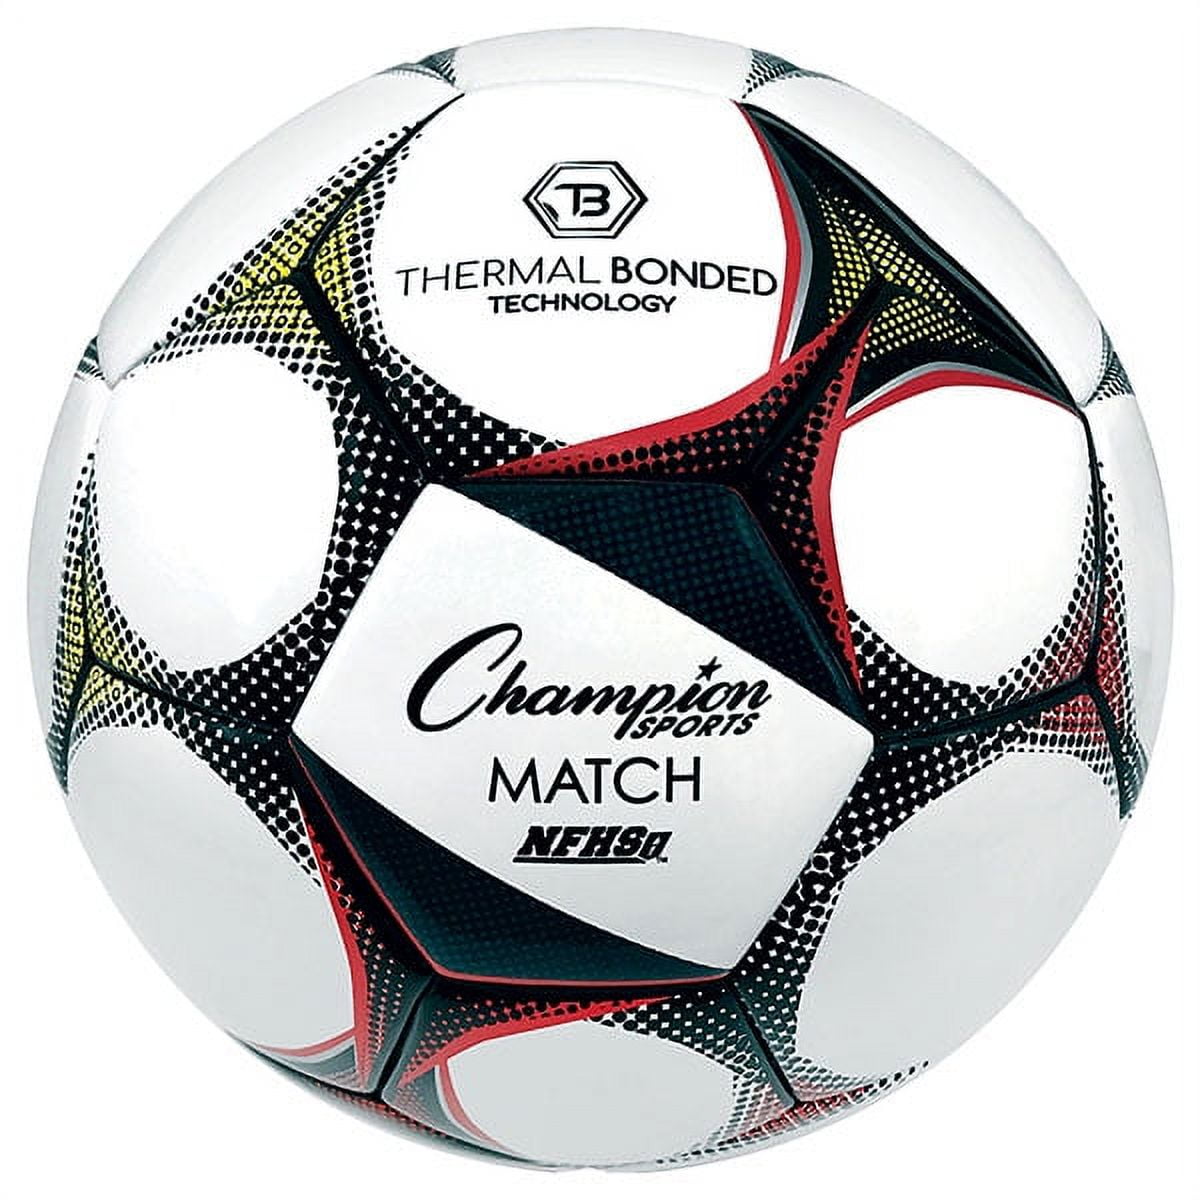 Picture of Champion Sports MATCH5 Thermal Bonded Soccer Ball - Size 5